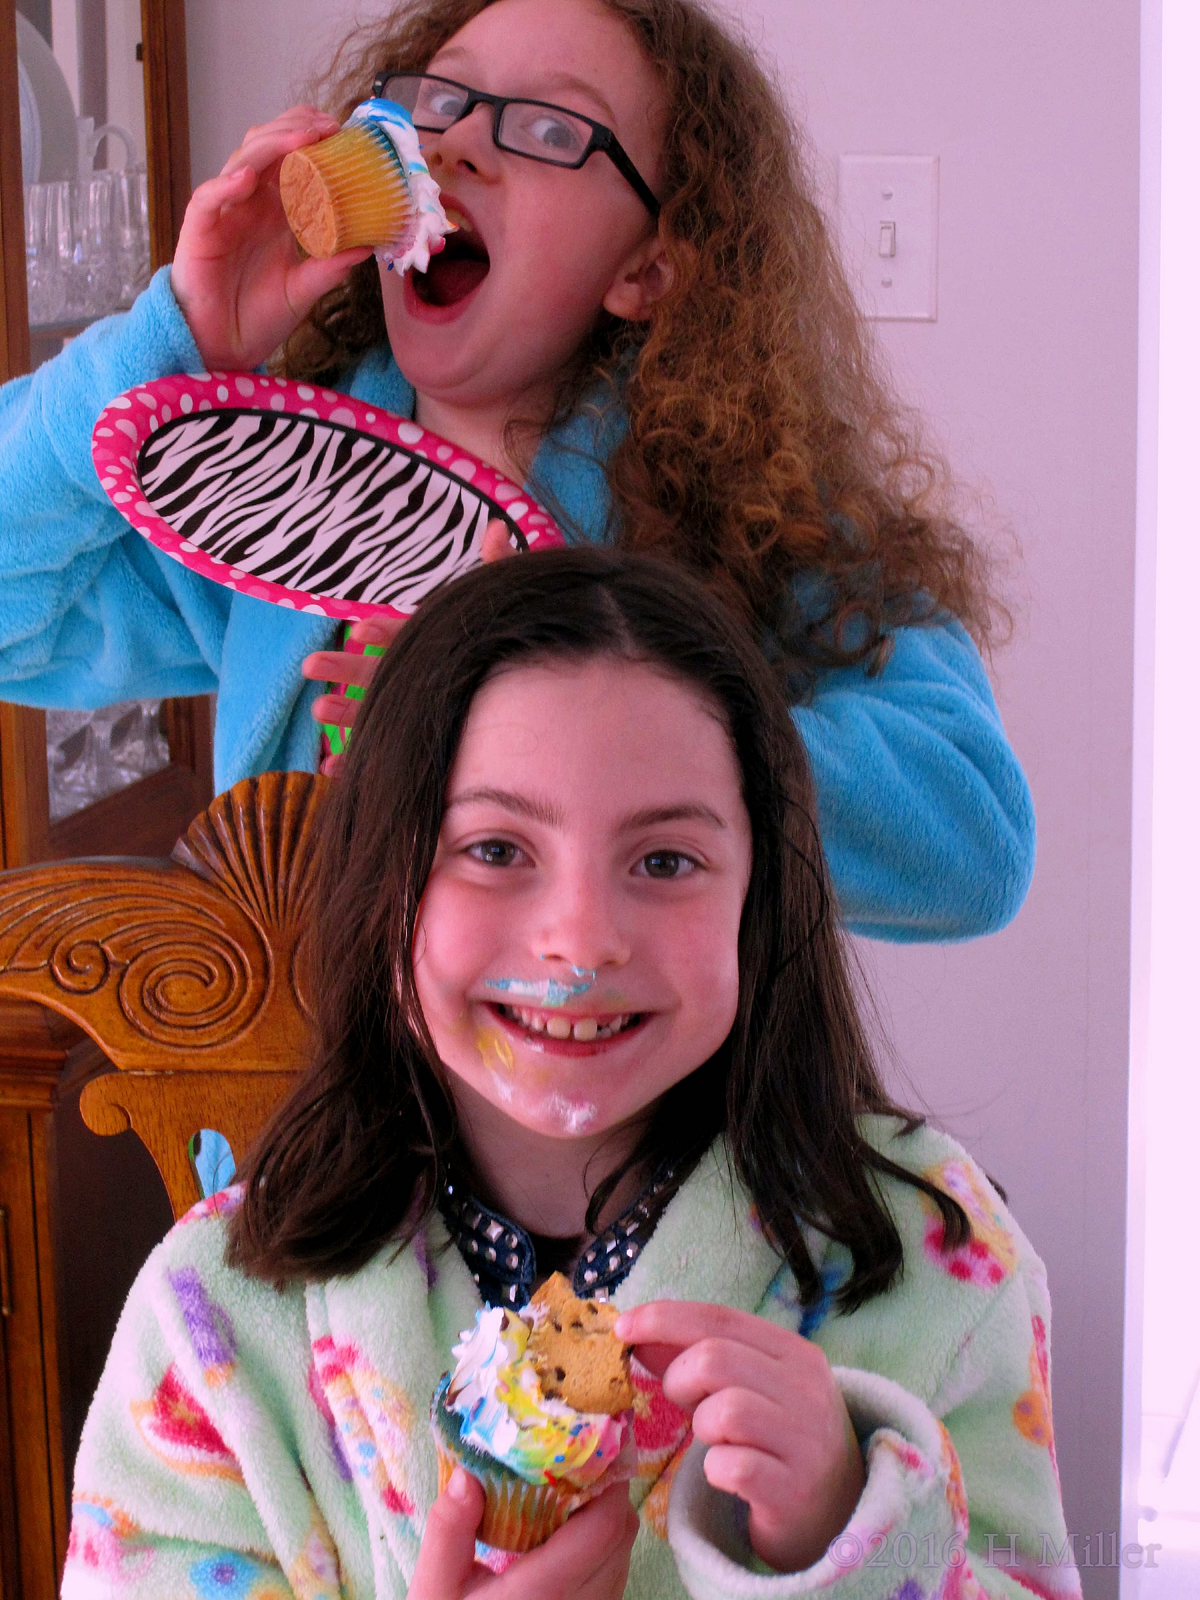 The Girls Are Sure Enjoying Themselves! Eating Spa Party Cupcakes Is Lots Of Fun With Friends! 